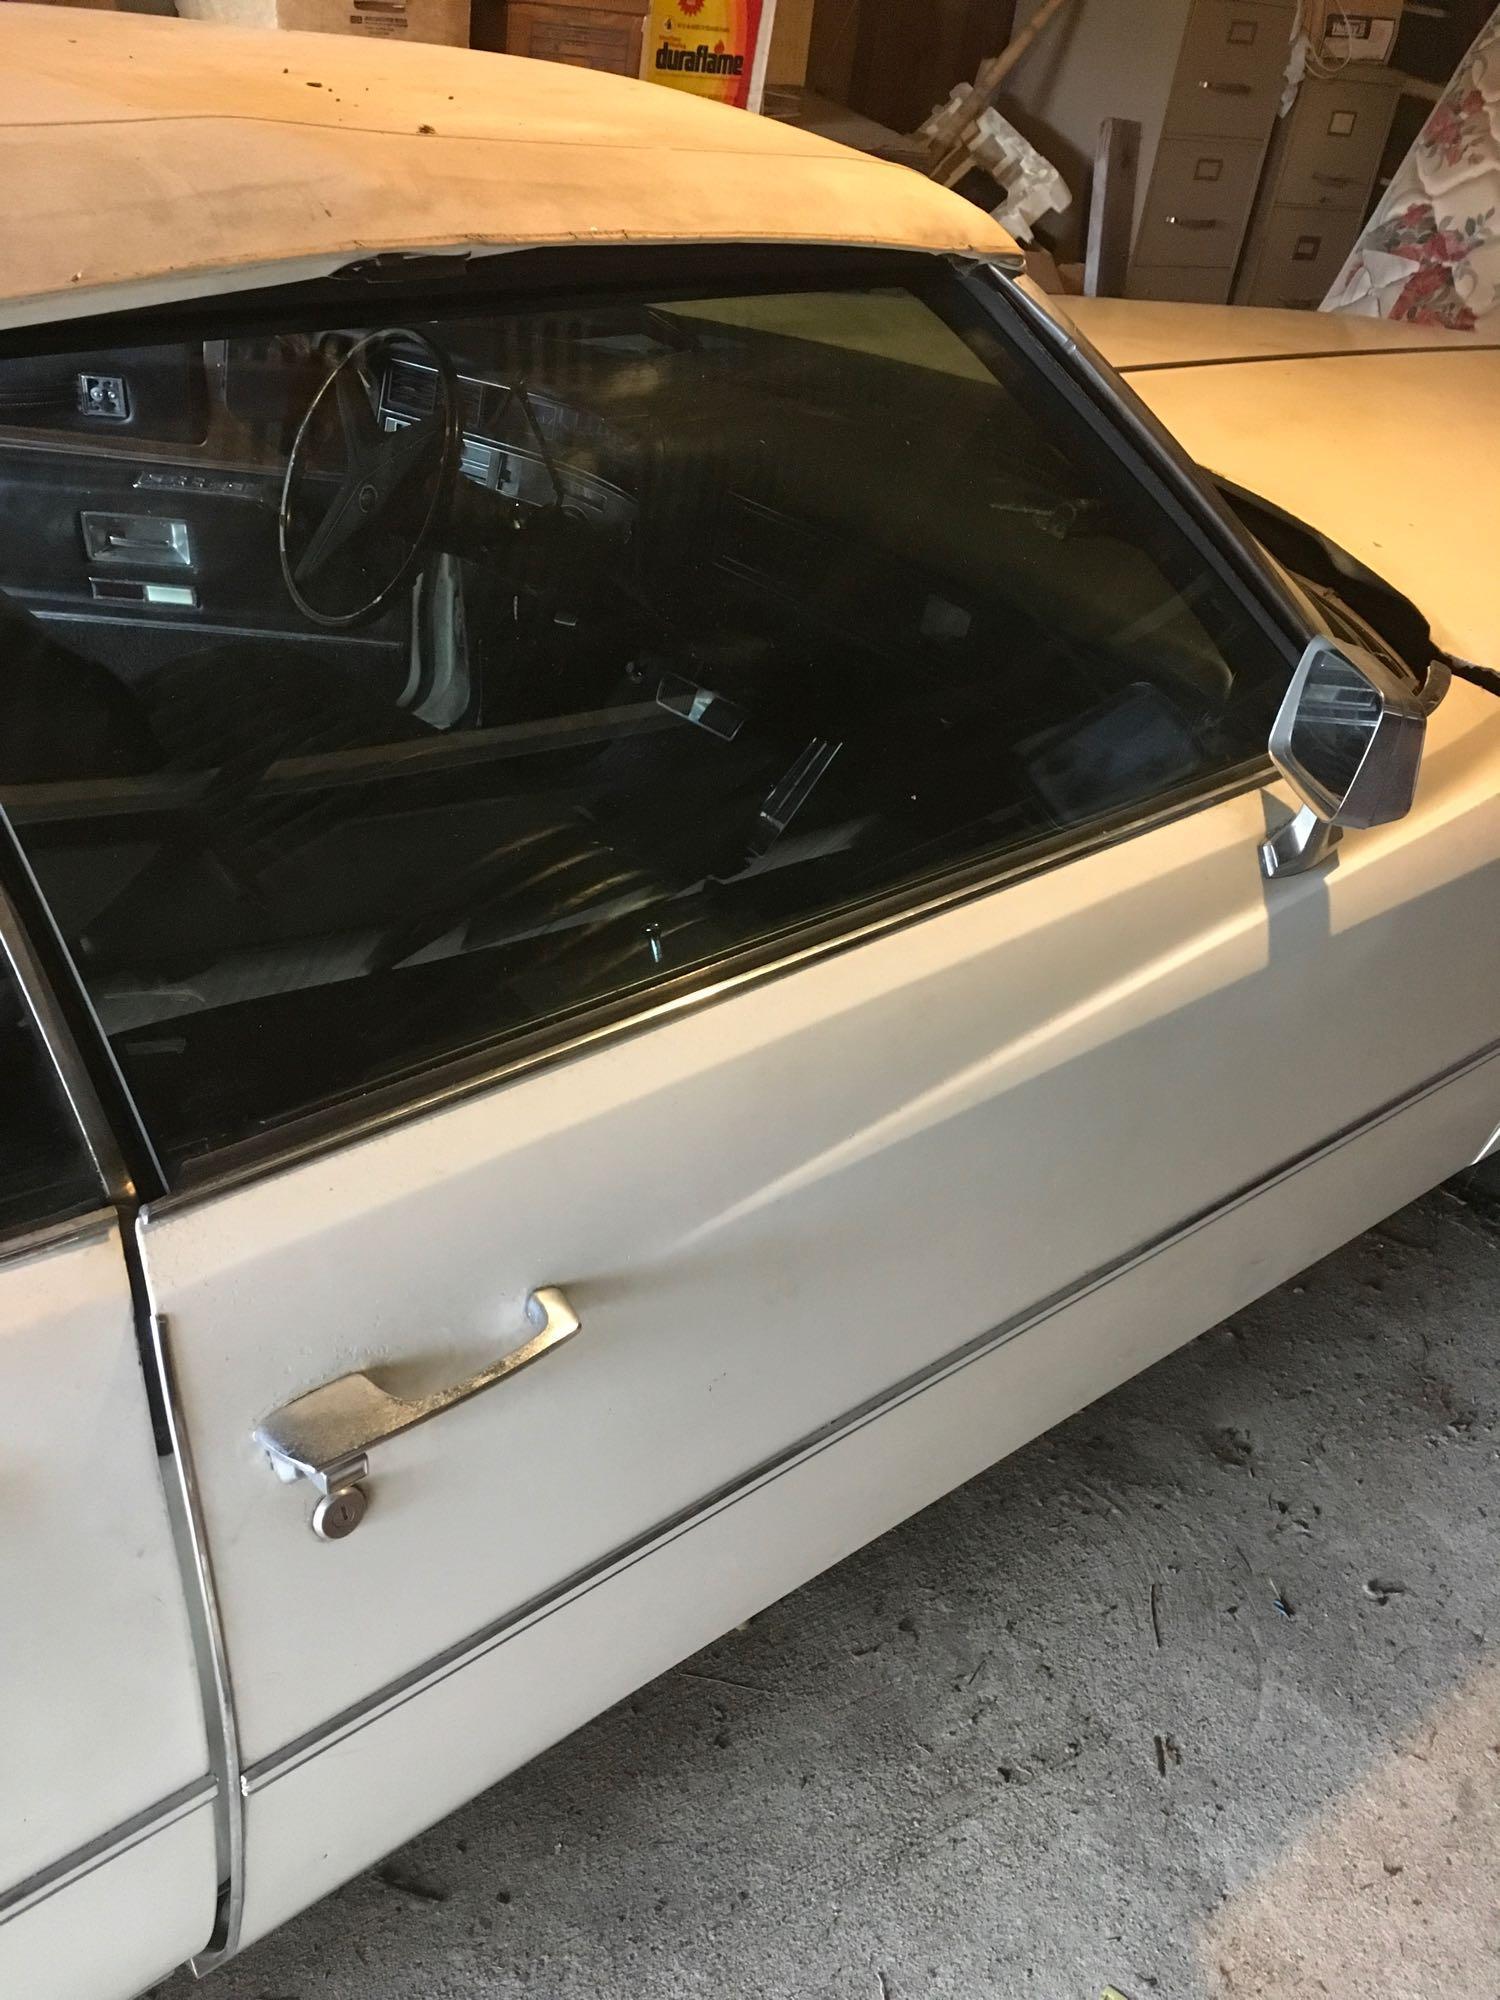 1973 Convertible Cadillac. Vin # 6L67S3Q448840 - MOTOR RUNS - started with jump wire SOLD AS IS